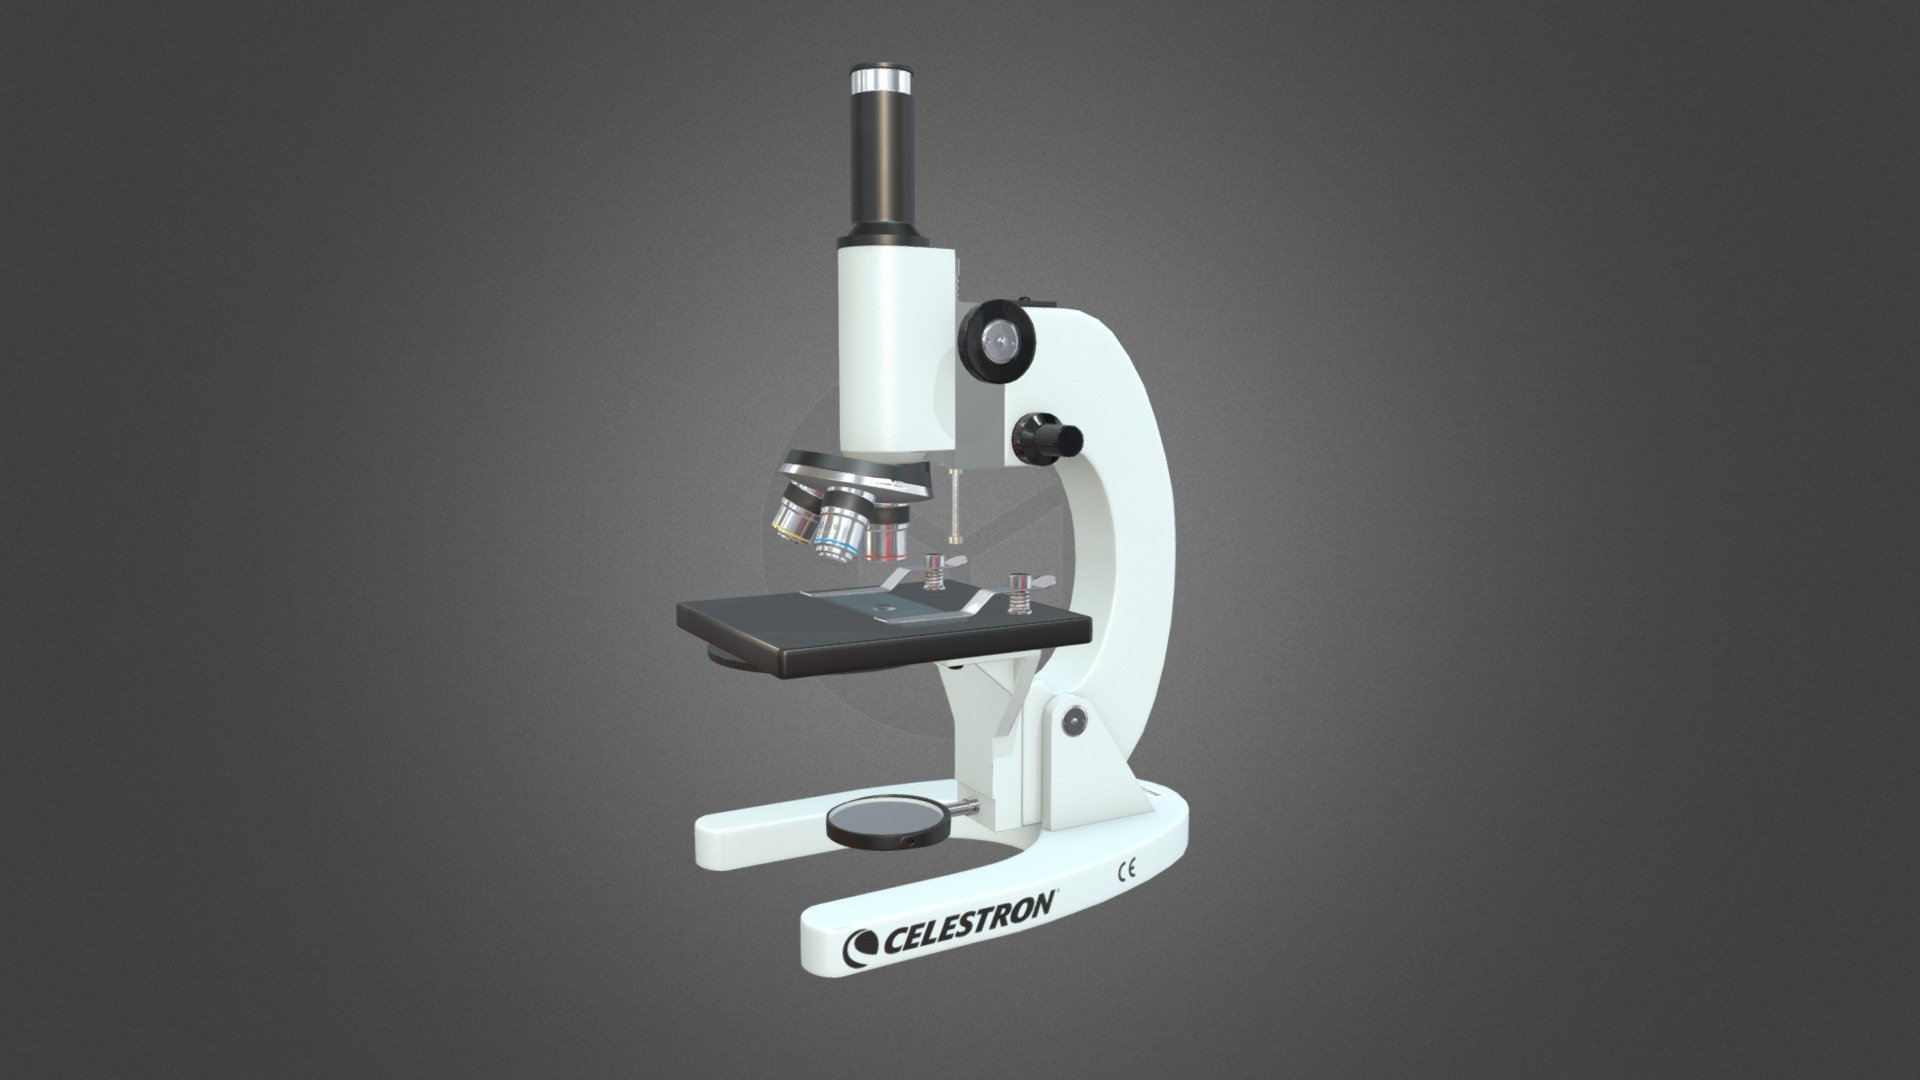 A Celestron 44102 microscope, modeled for game engines 3d model